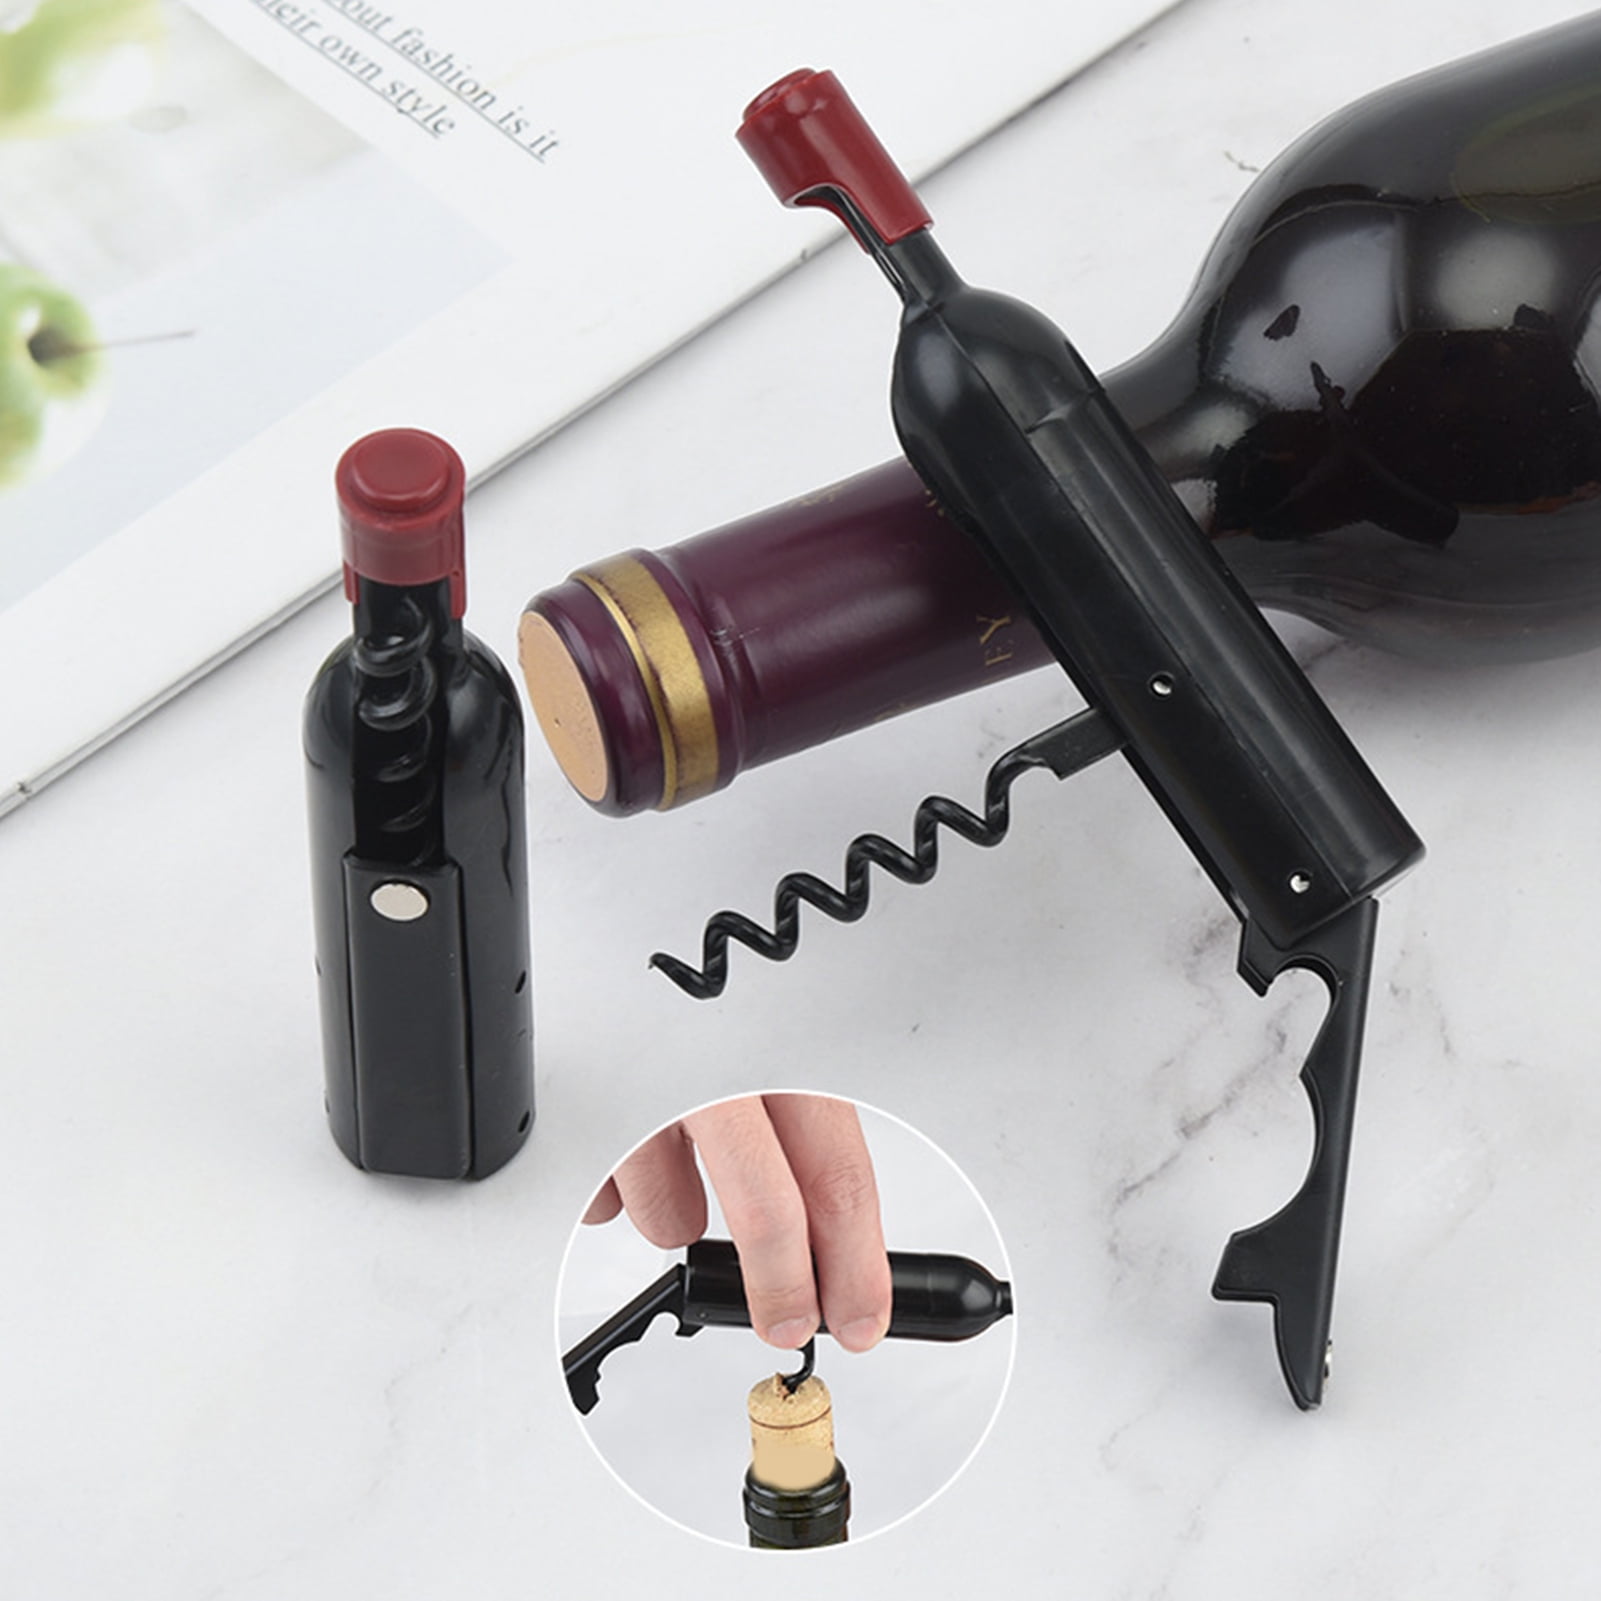 Professional Wine Opener Set of 3 packs for Sommeliers Waiters and Bartenders in Bar,With Rose Handle Waiters Corkscrew,All-in-one Bottle Opener Wine Key Tools Beer opener Set of 5 